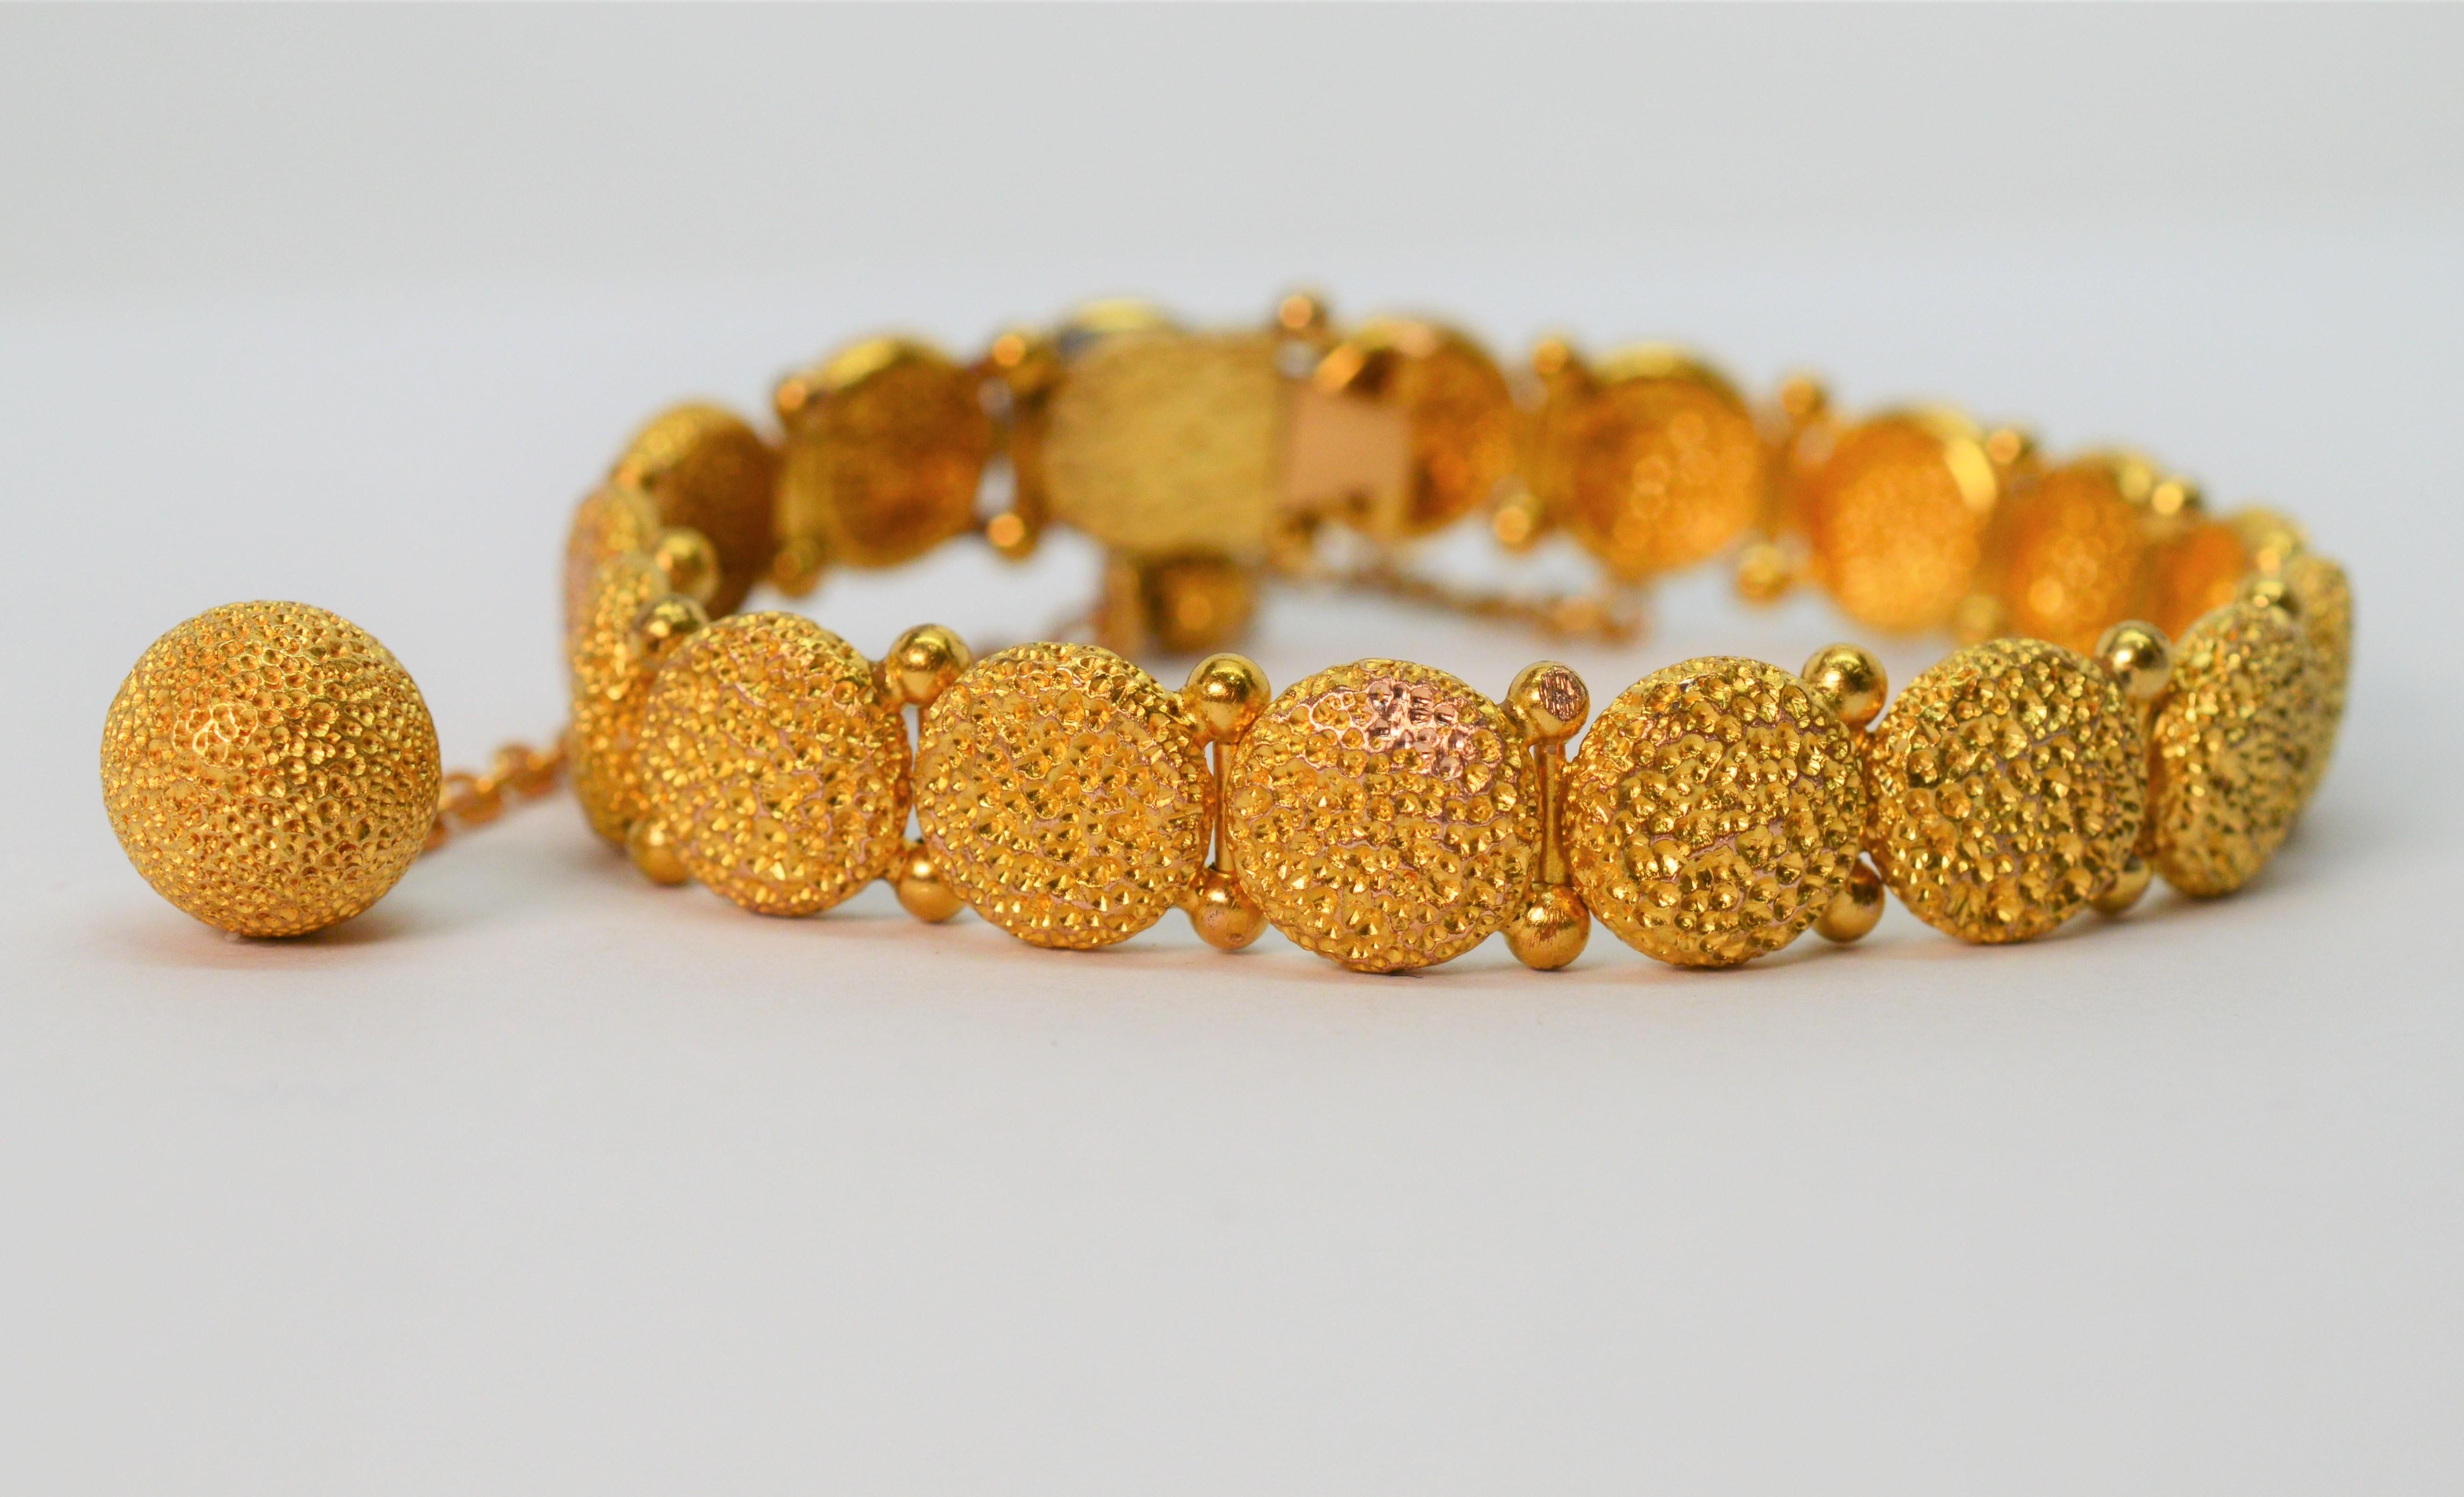 Unique texture is displayed on this rich twenty one karat 21K yellow gold bracelet through the artisan's sand casting. Seventeen individual links joined with decorative hinges create it's 6-3/4 inch length. A matching decorative gold ball charm